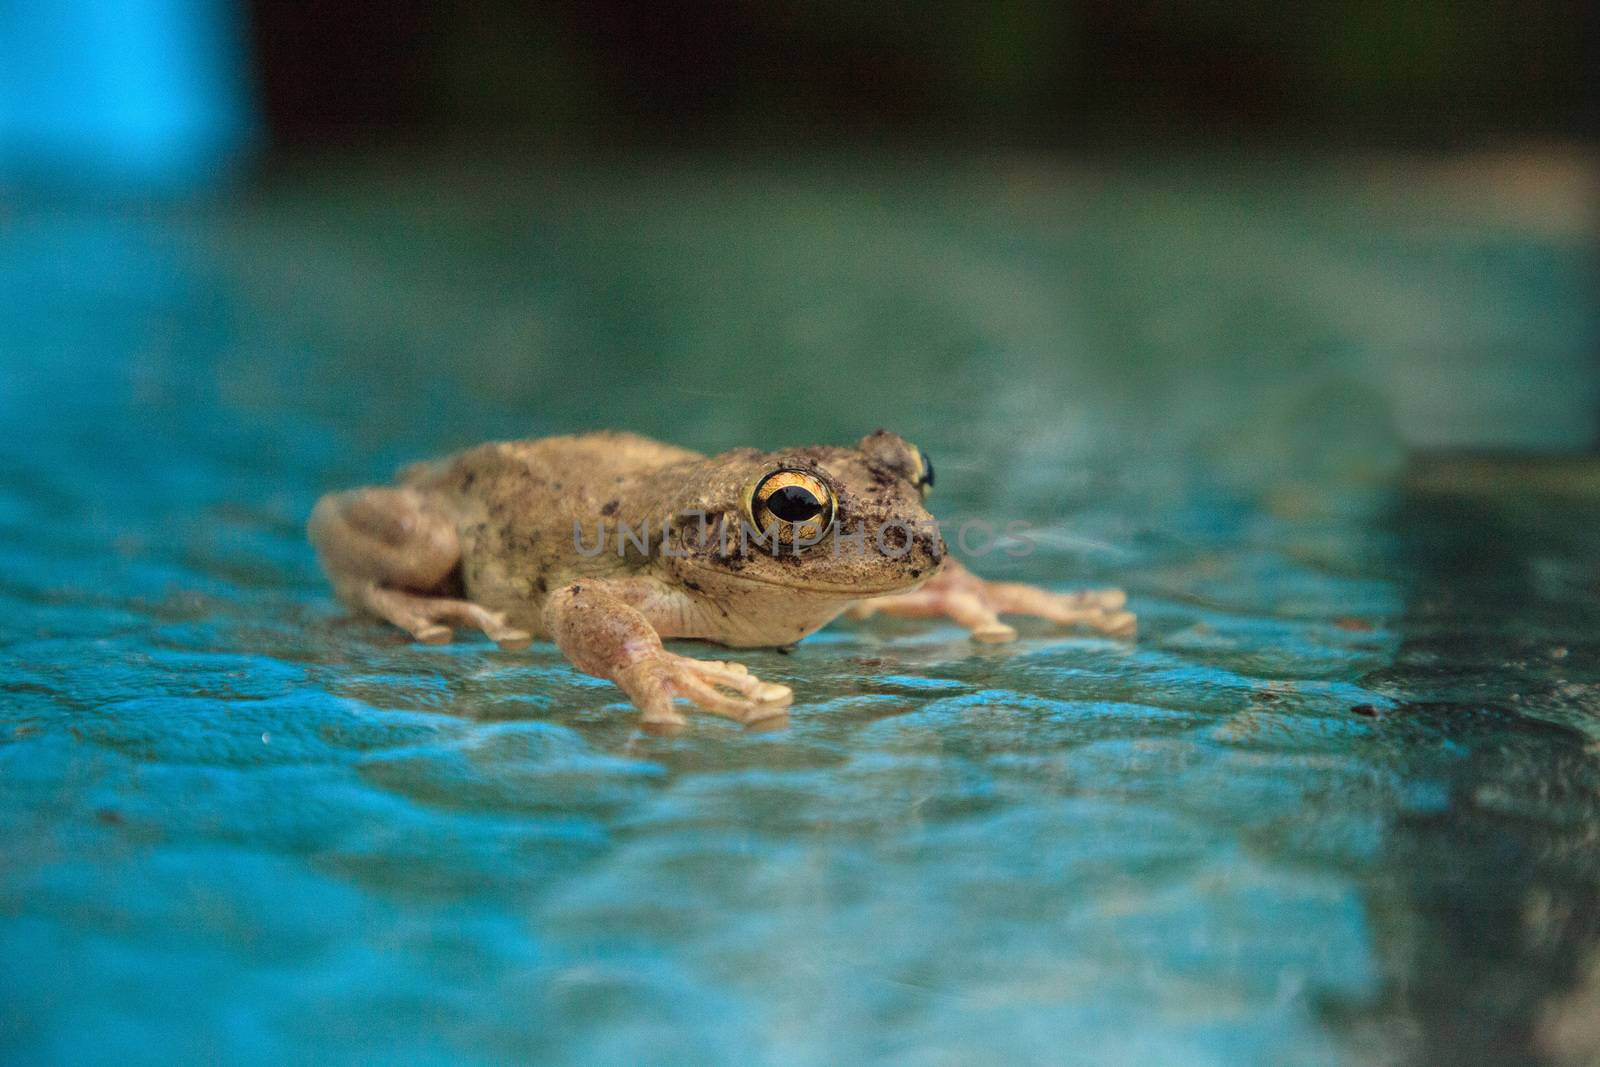 Pinewoods treefrog Hyla femoralis sits on a glass table in Naples, Florida.